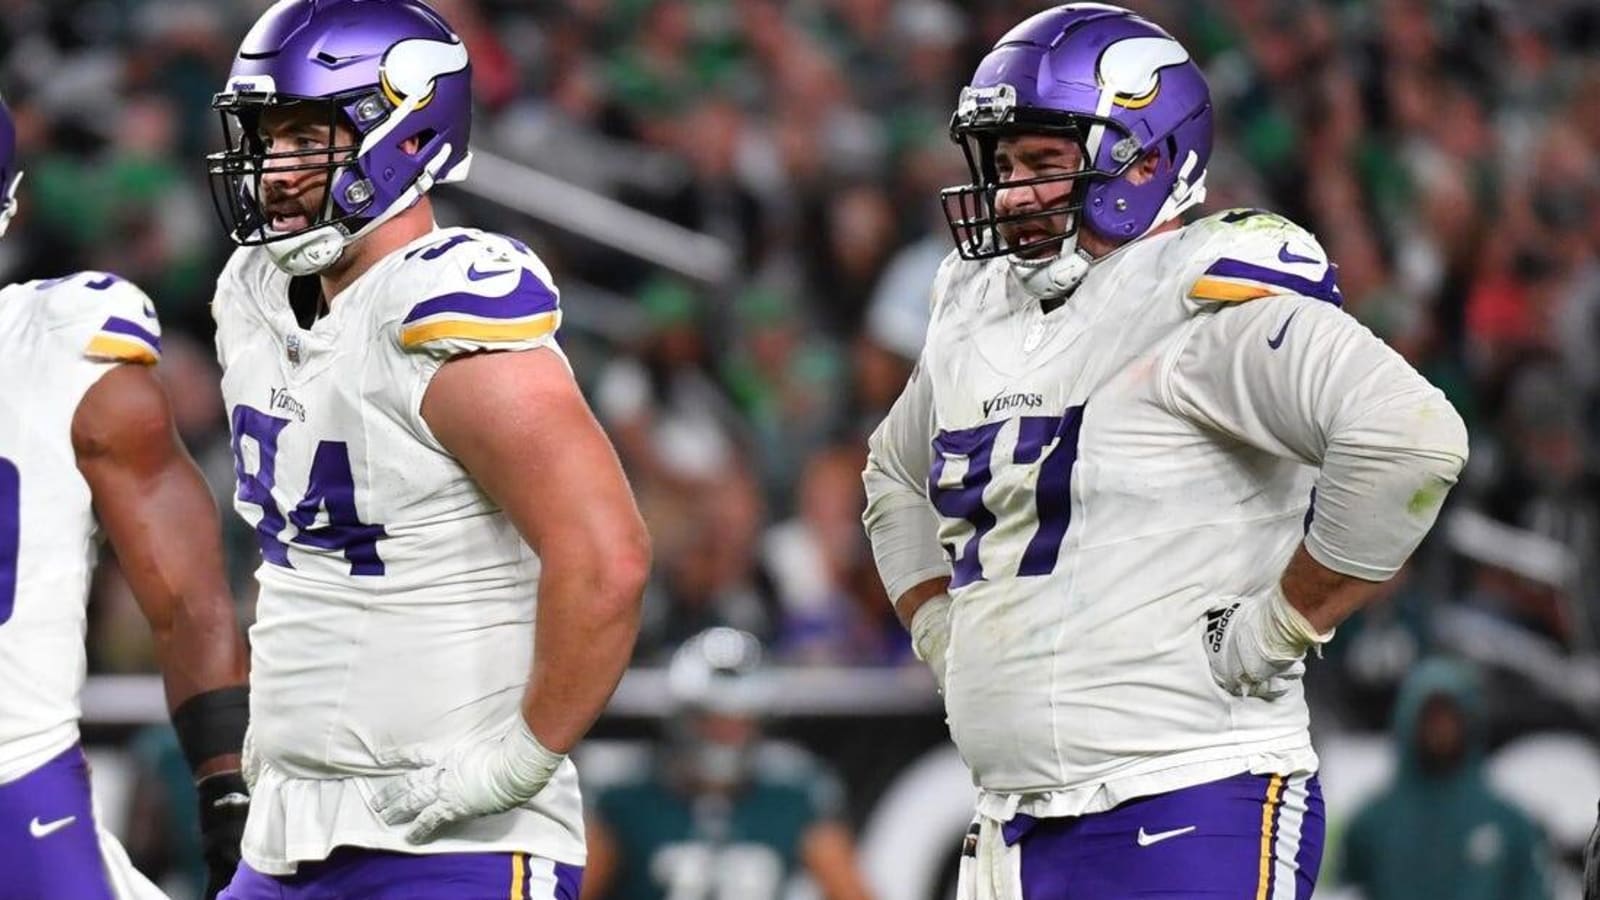 Vikings, Chargers both look to get off the schneid, grab first win